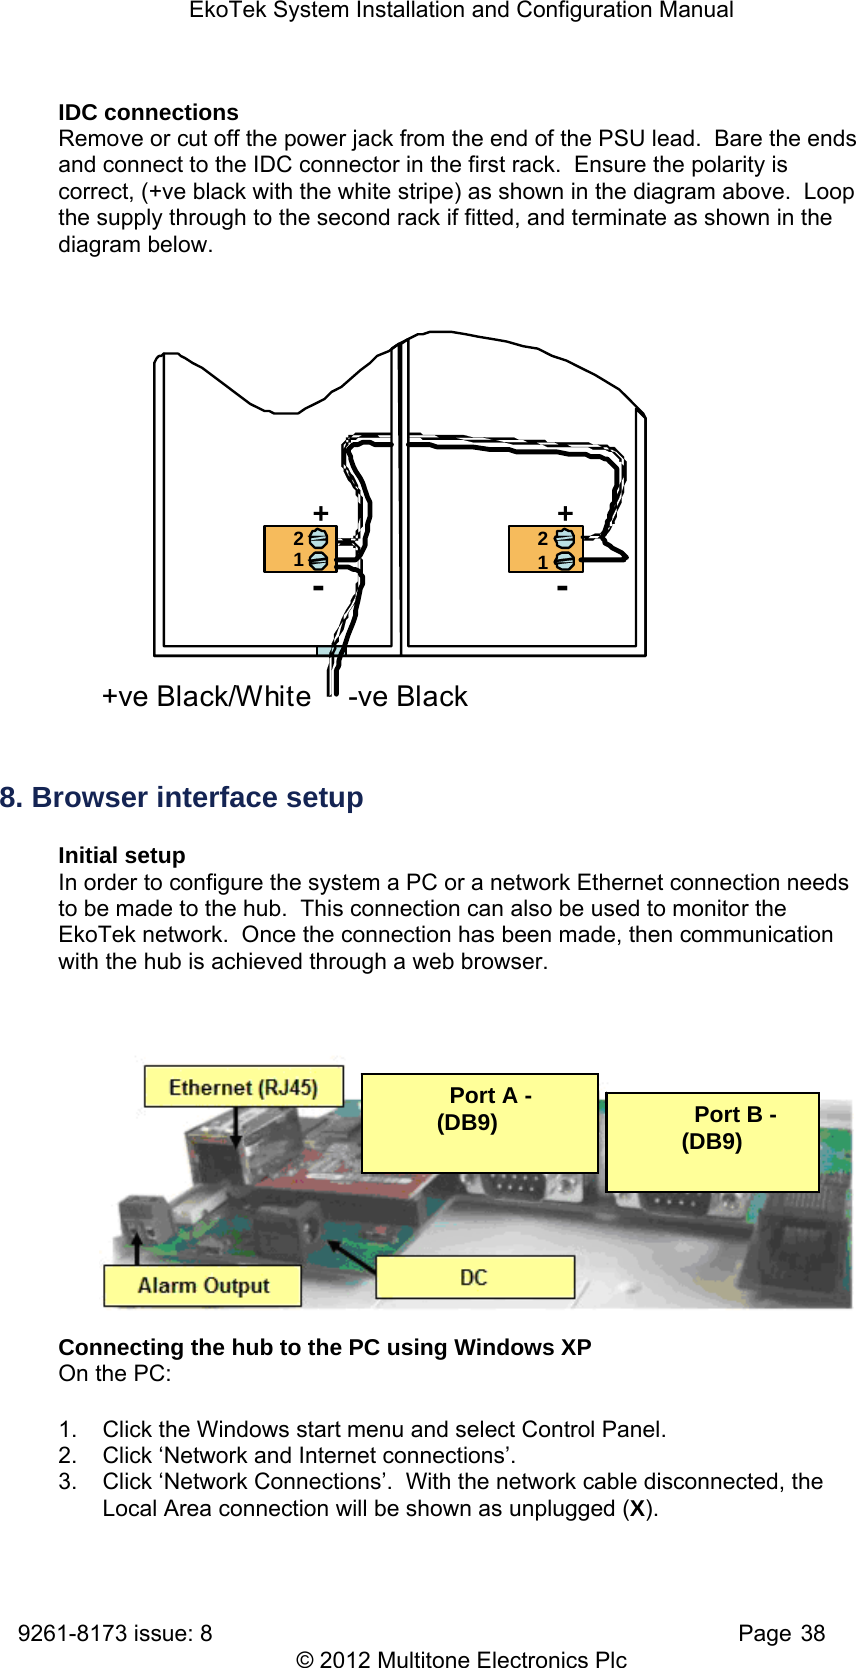 EkoTek System Installation and Configuration Manual 9261-8173 issue: 8   Page 38 © 2012 Multitone Electronics Plc IDC connections Remove or cut off the power jack from the end of the PSU lead.  Bare the ends and connect to the IDC connector in the first rack.  Ensure the polarity is correct, (+ve black with the white stripe) as shown in the diagram above.  Loop the supply through to the second rack if fitted, and terminate as shown in the diagram below. ++--2121+ve Black/White -ve Black 8. Browser interface setup Initial setup In order to configure the system a PC or a network Ethernet connection needs to be made to the hub.  This connection can also be used to monitor the EkoTek network.  Once the connection has been made, then communication with the hub is achieved through a web browser.       Connecting the hub to the PC using Windows XP On the PC: 1.  Click the Windows start menu and select Control Panel. 2.  Click ‘Network and Internet connections’. 3.  Click ‘Network Connections’.  With the network cable disconnected, the Local Area connection will be shown as unplugged (X).   Port A - (DB9)    Port B - (DB9) 